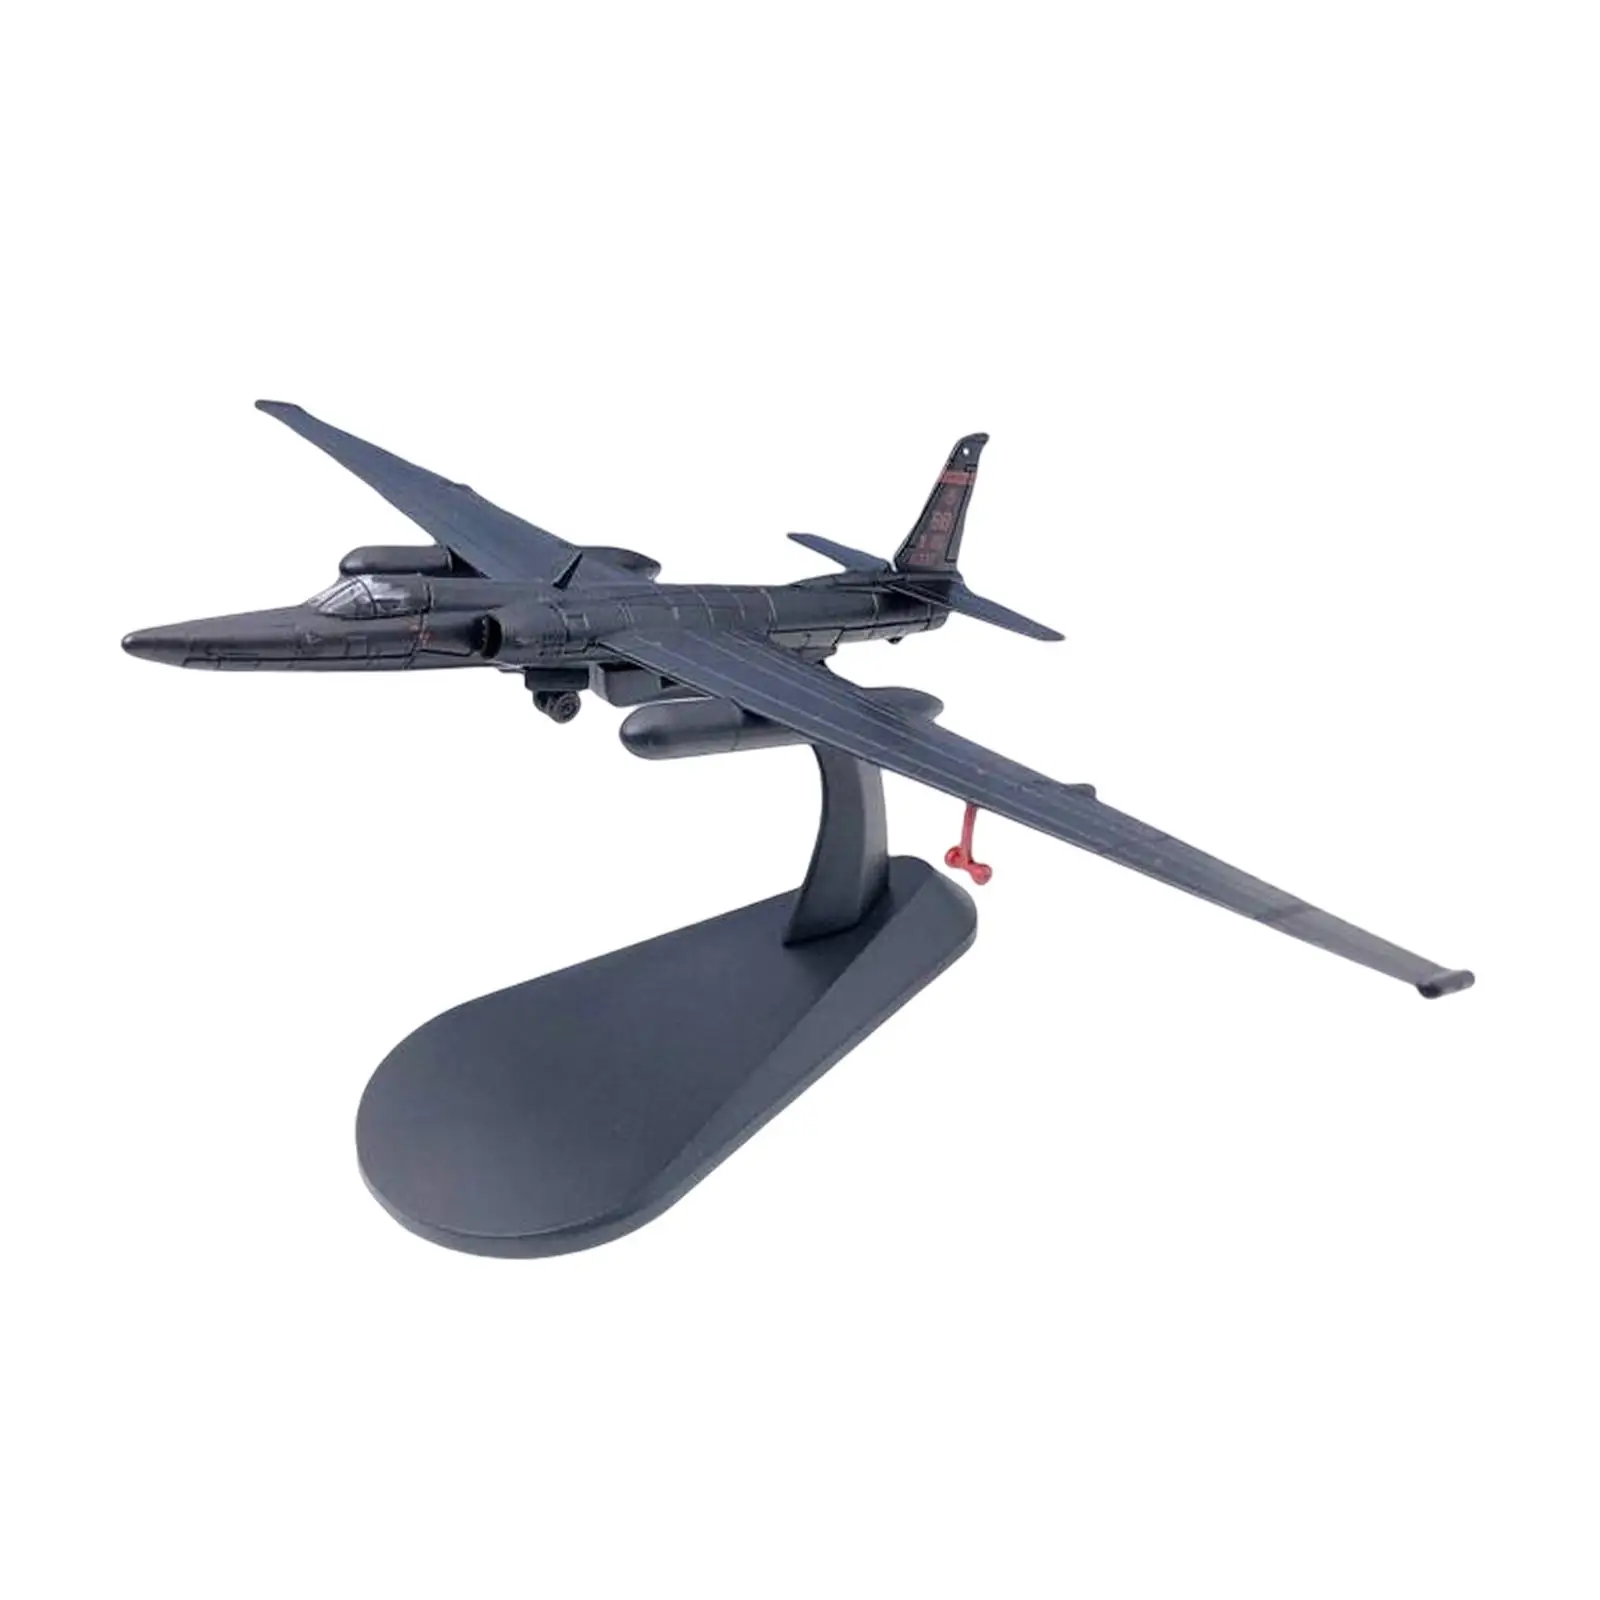 1/144 U2 Reconnaissance Aircraft Model with Display Stand, Decoration